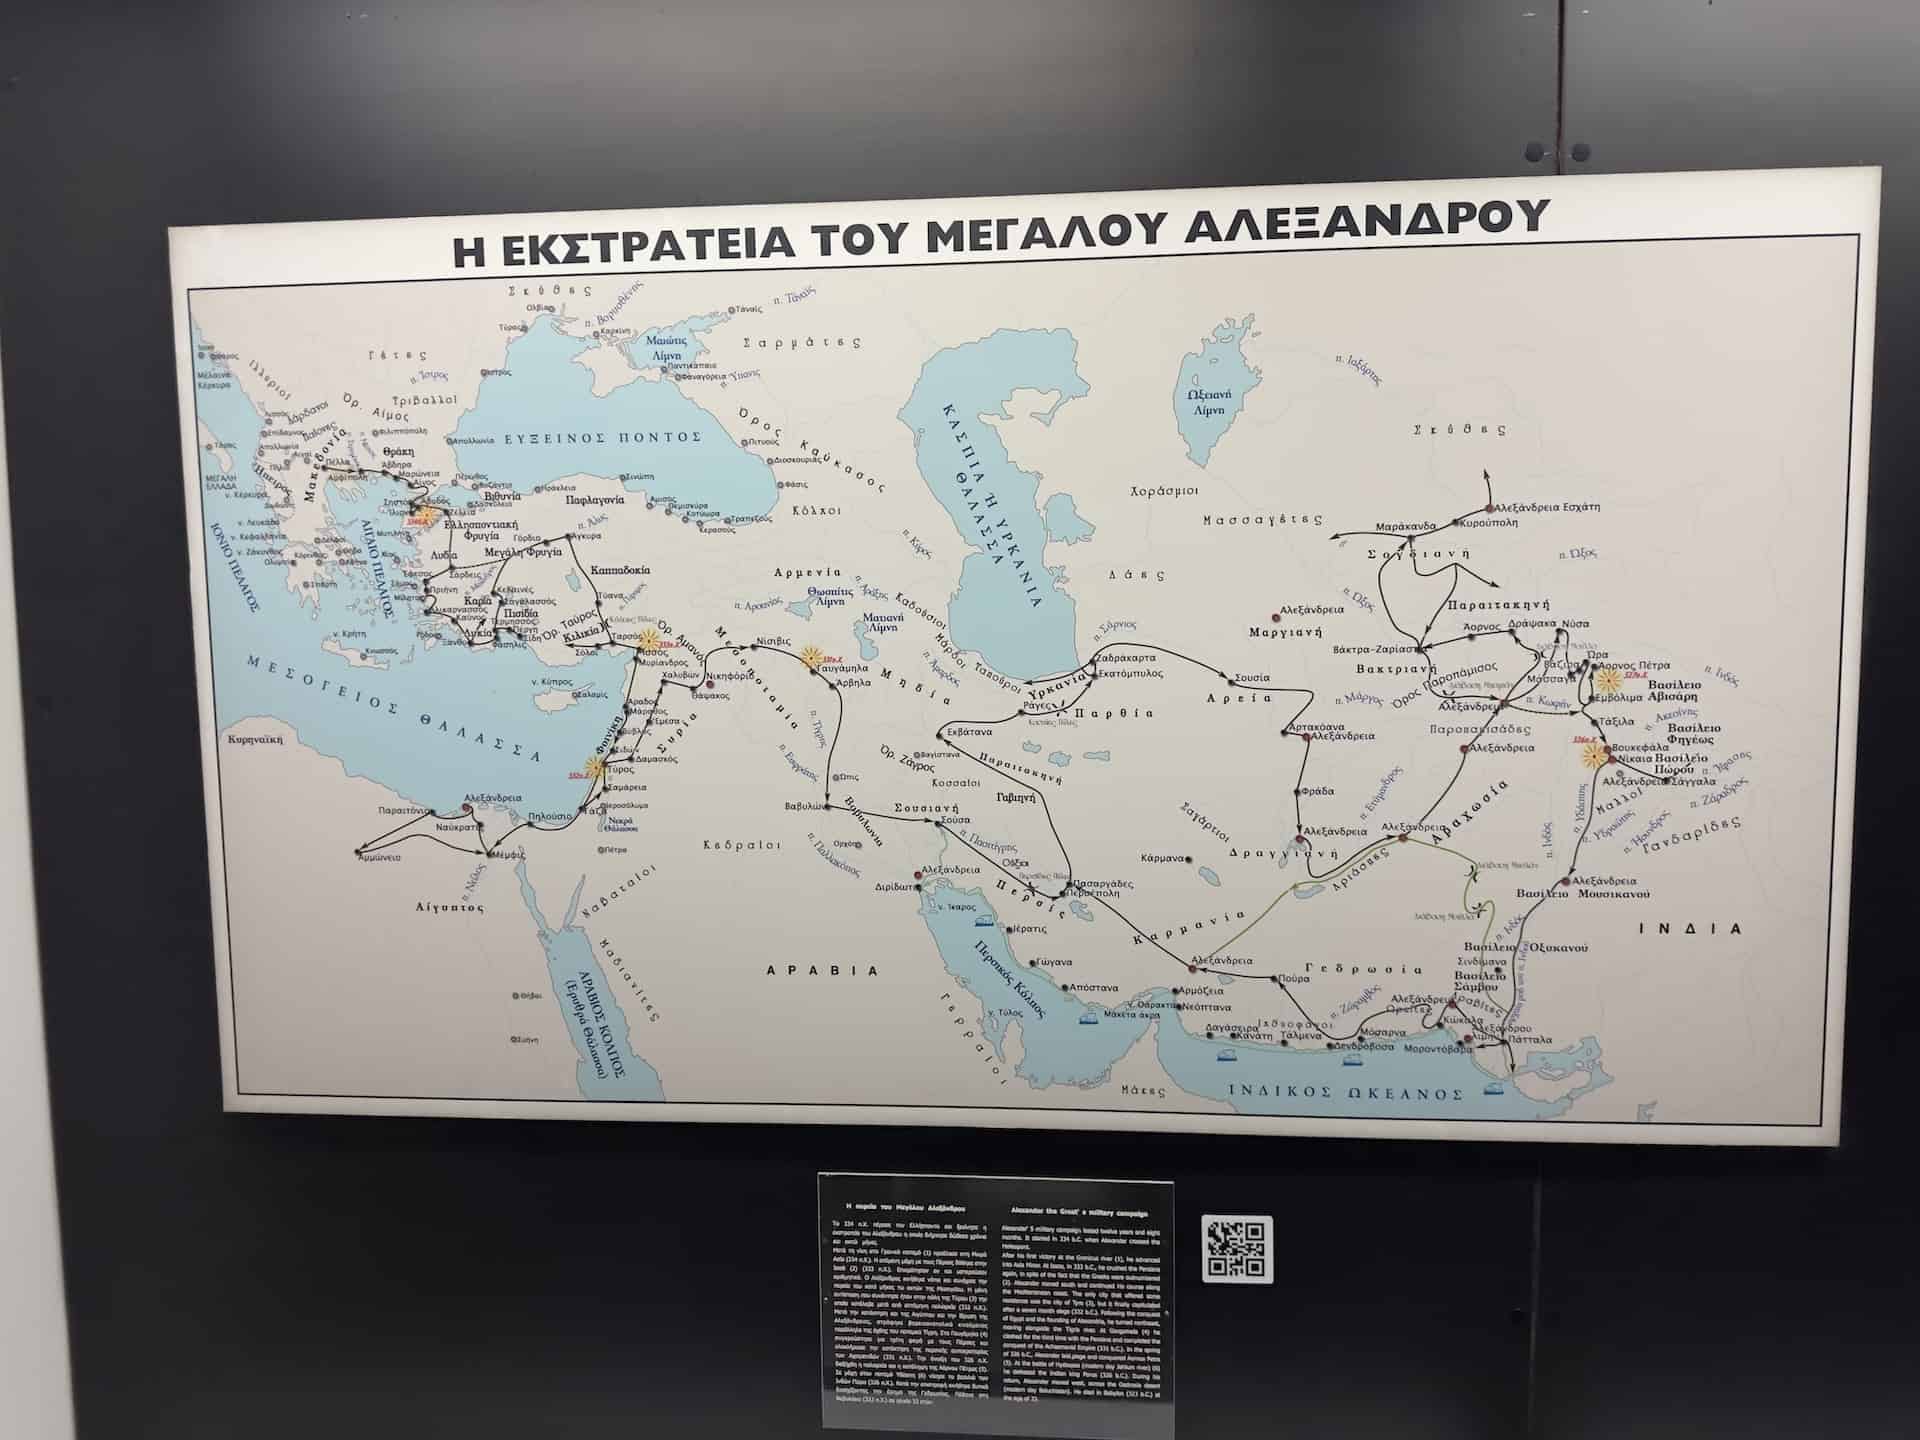 Alexander the Great's military campaigns at the War Museum in Athens, Greece